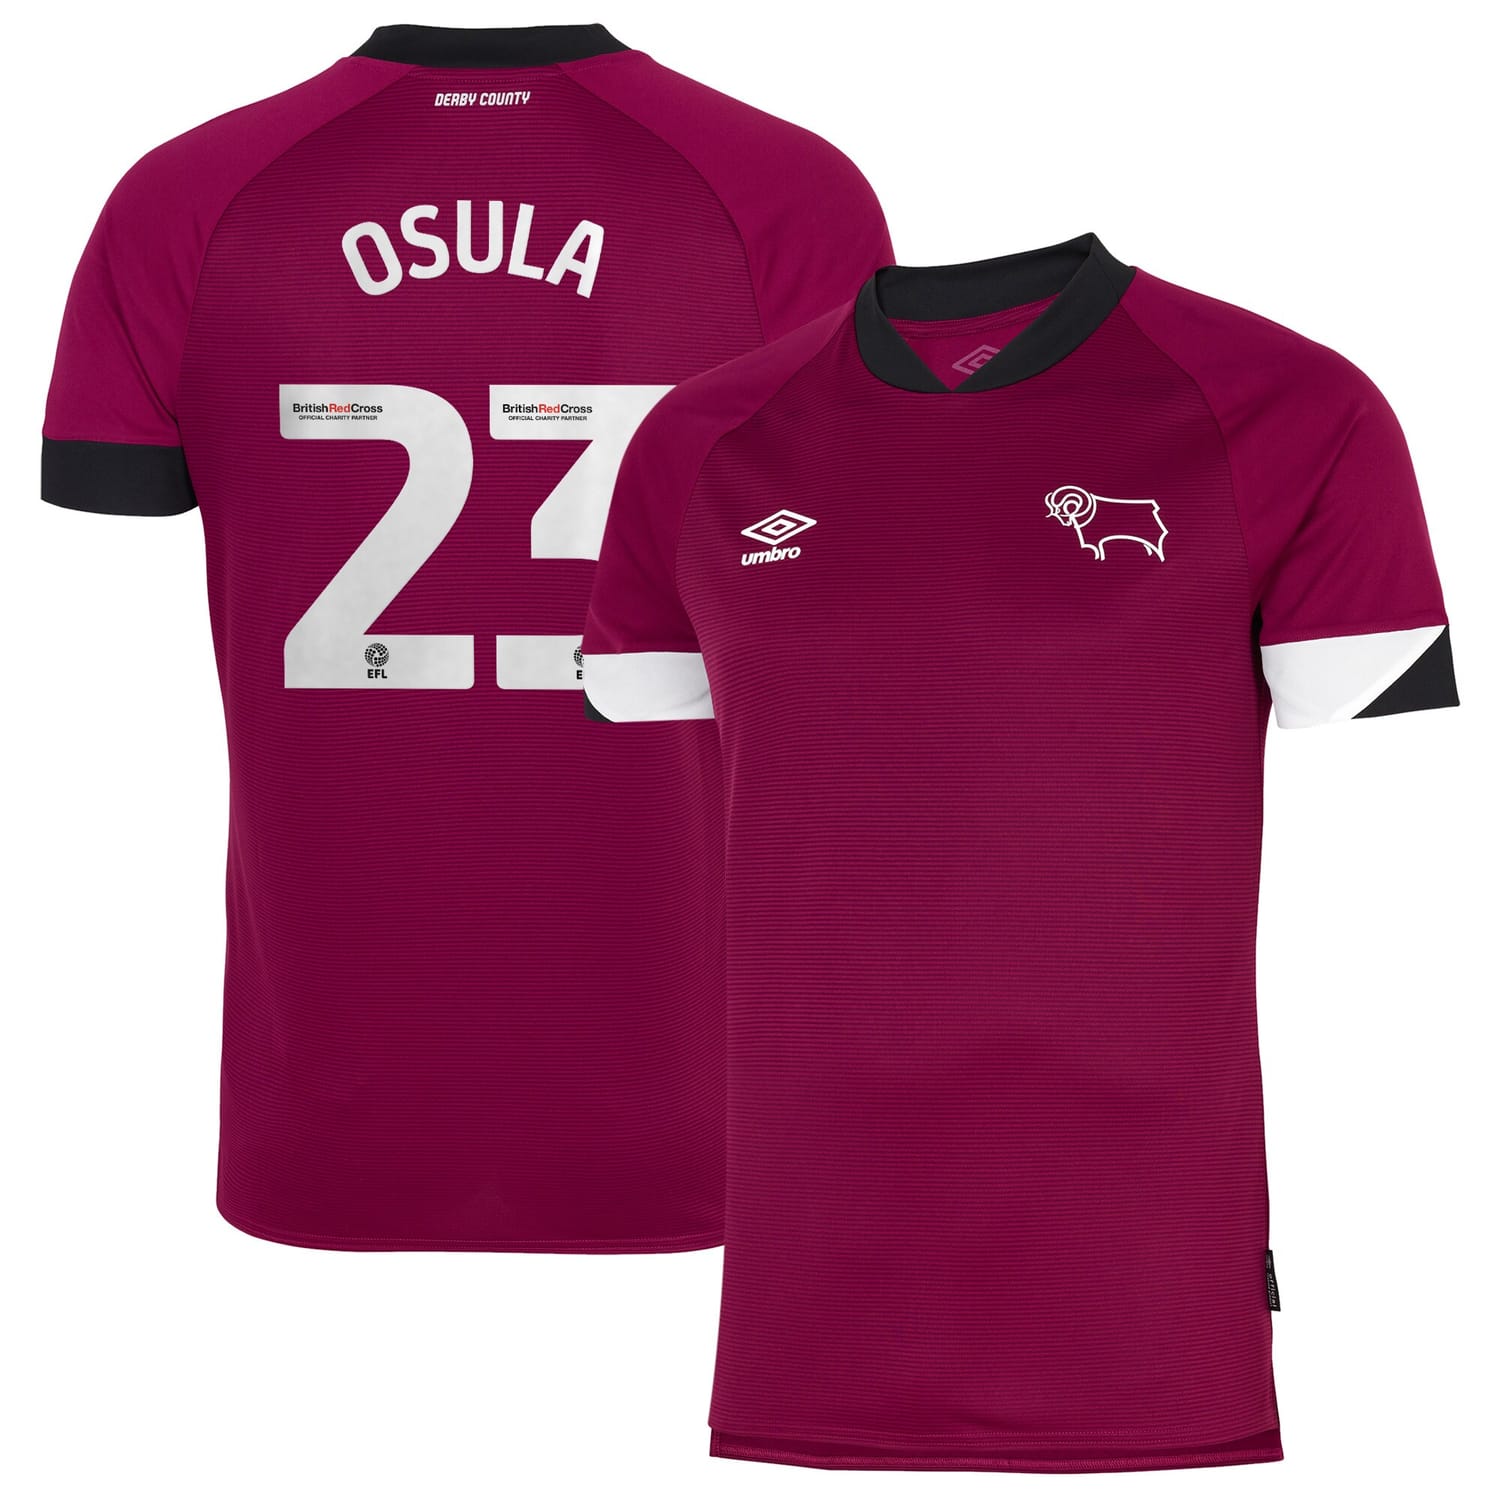 EFL League One Derby County Third Jersey Shirt 2022-23 player Osula 23 printing for Men